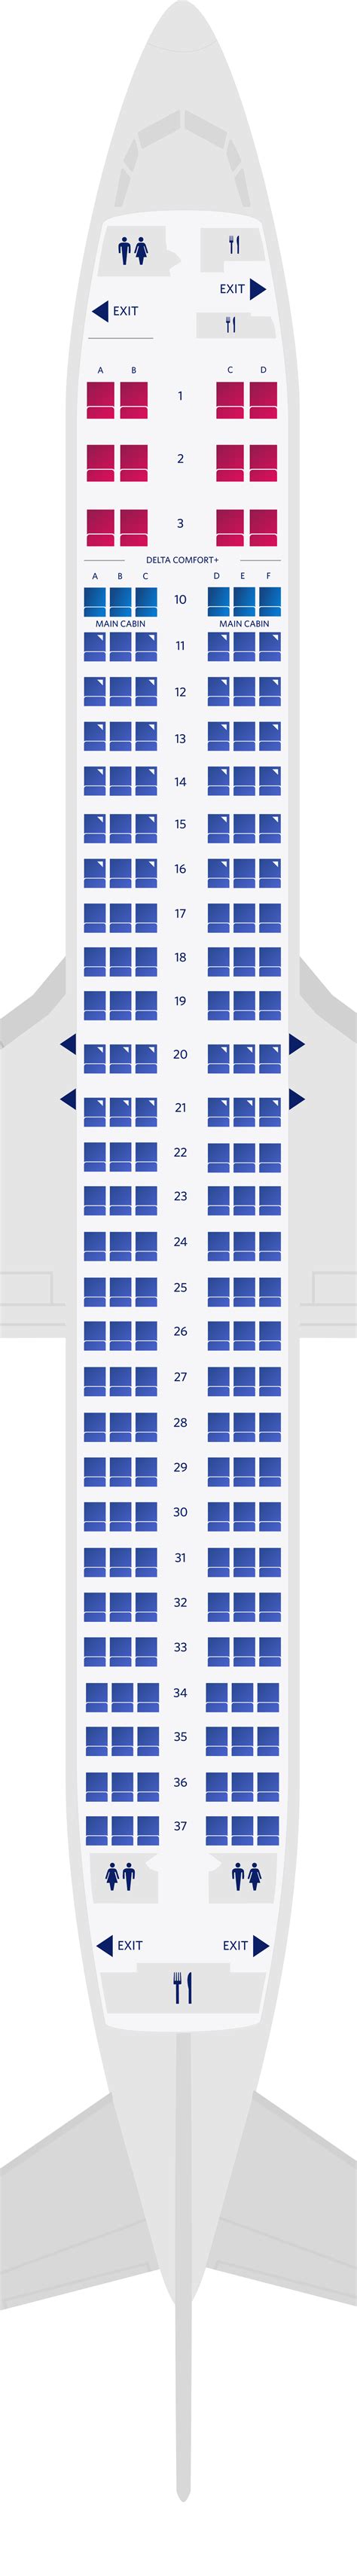 Boeing 737 seat layout. 3-4-3. Standard seat pitch. (the measure of legroom space between a point on one seat and the same point on the seat in front of it) 6'4" (193 cm) sleeping space. 34" (86.4 cm) 31" (78.7 cm) Standard seat recline. (the distance between a seat back in its full upright and full recline position) 180°. 